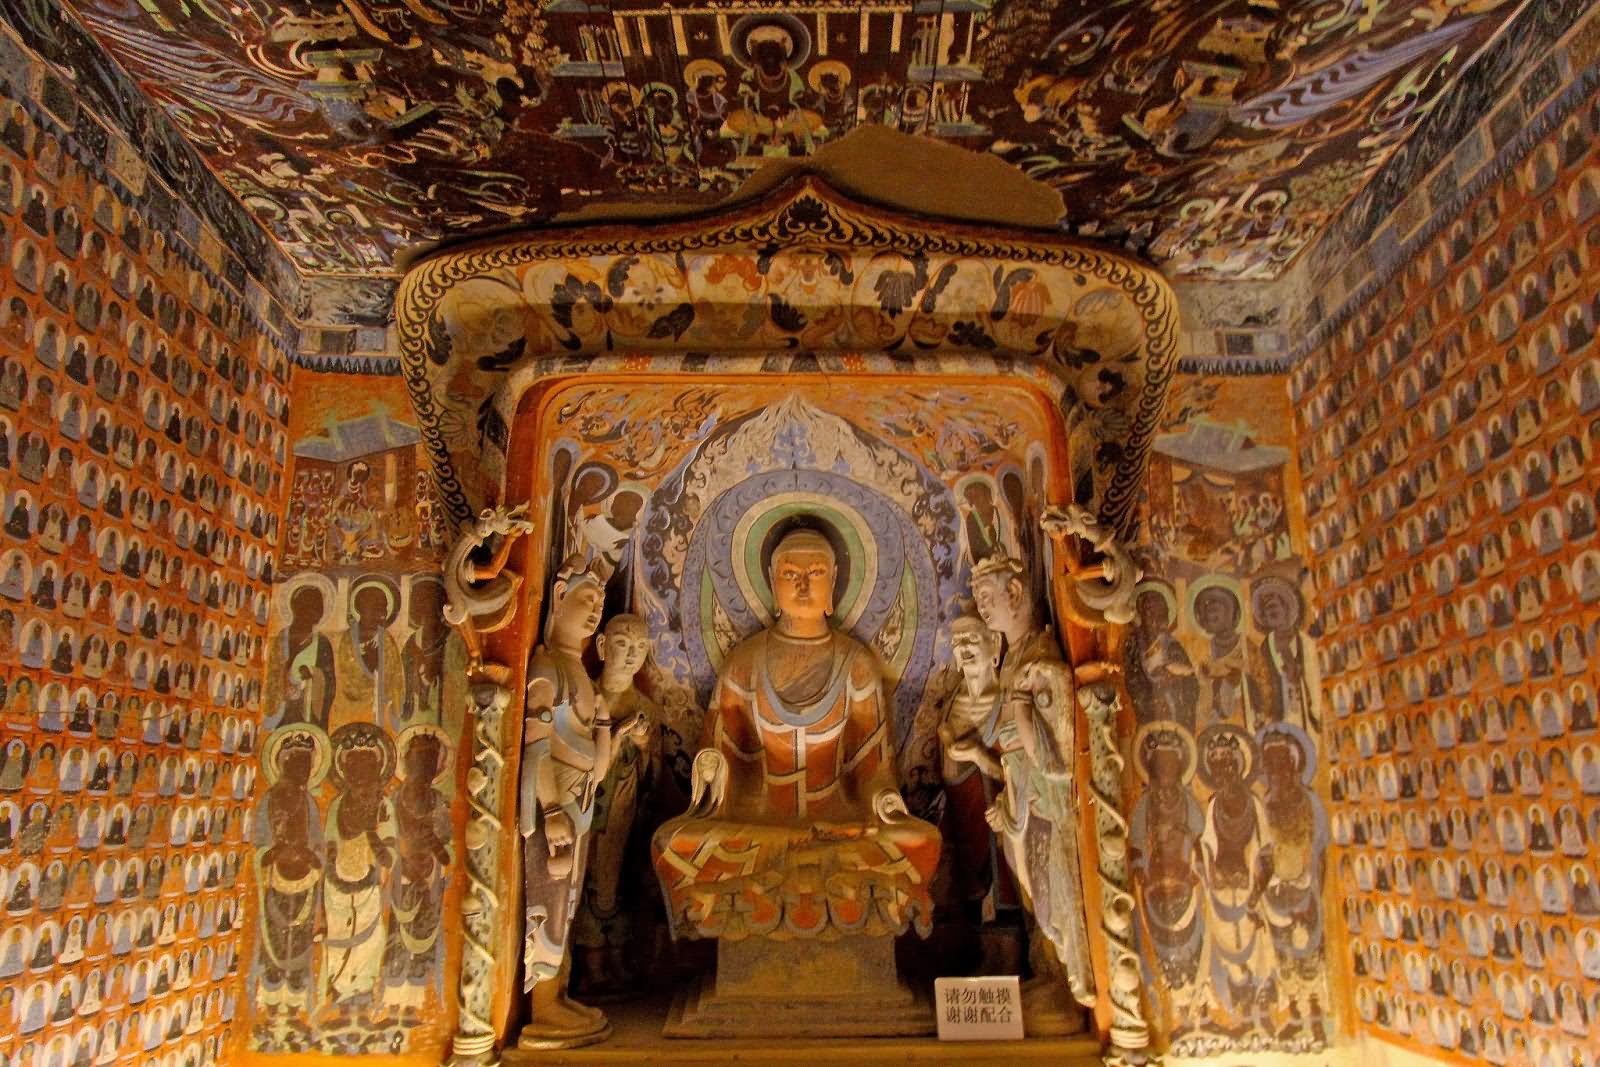 Lord Buddha Statue Inside The Mogao Caves At Dunhuang